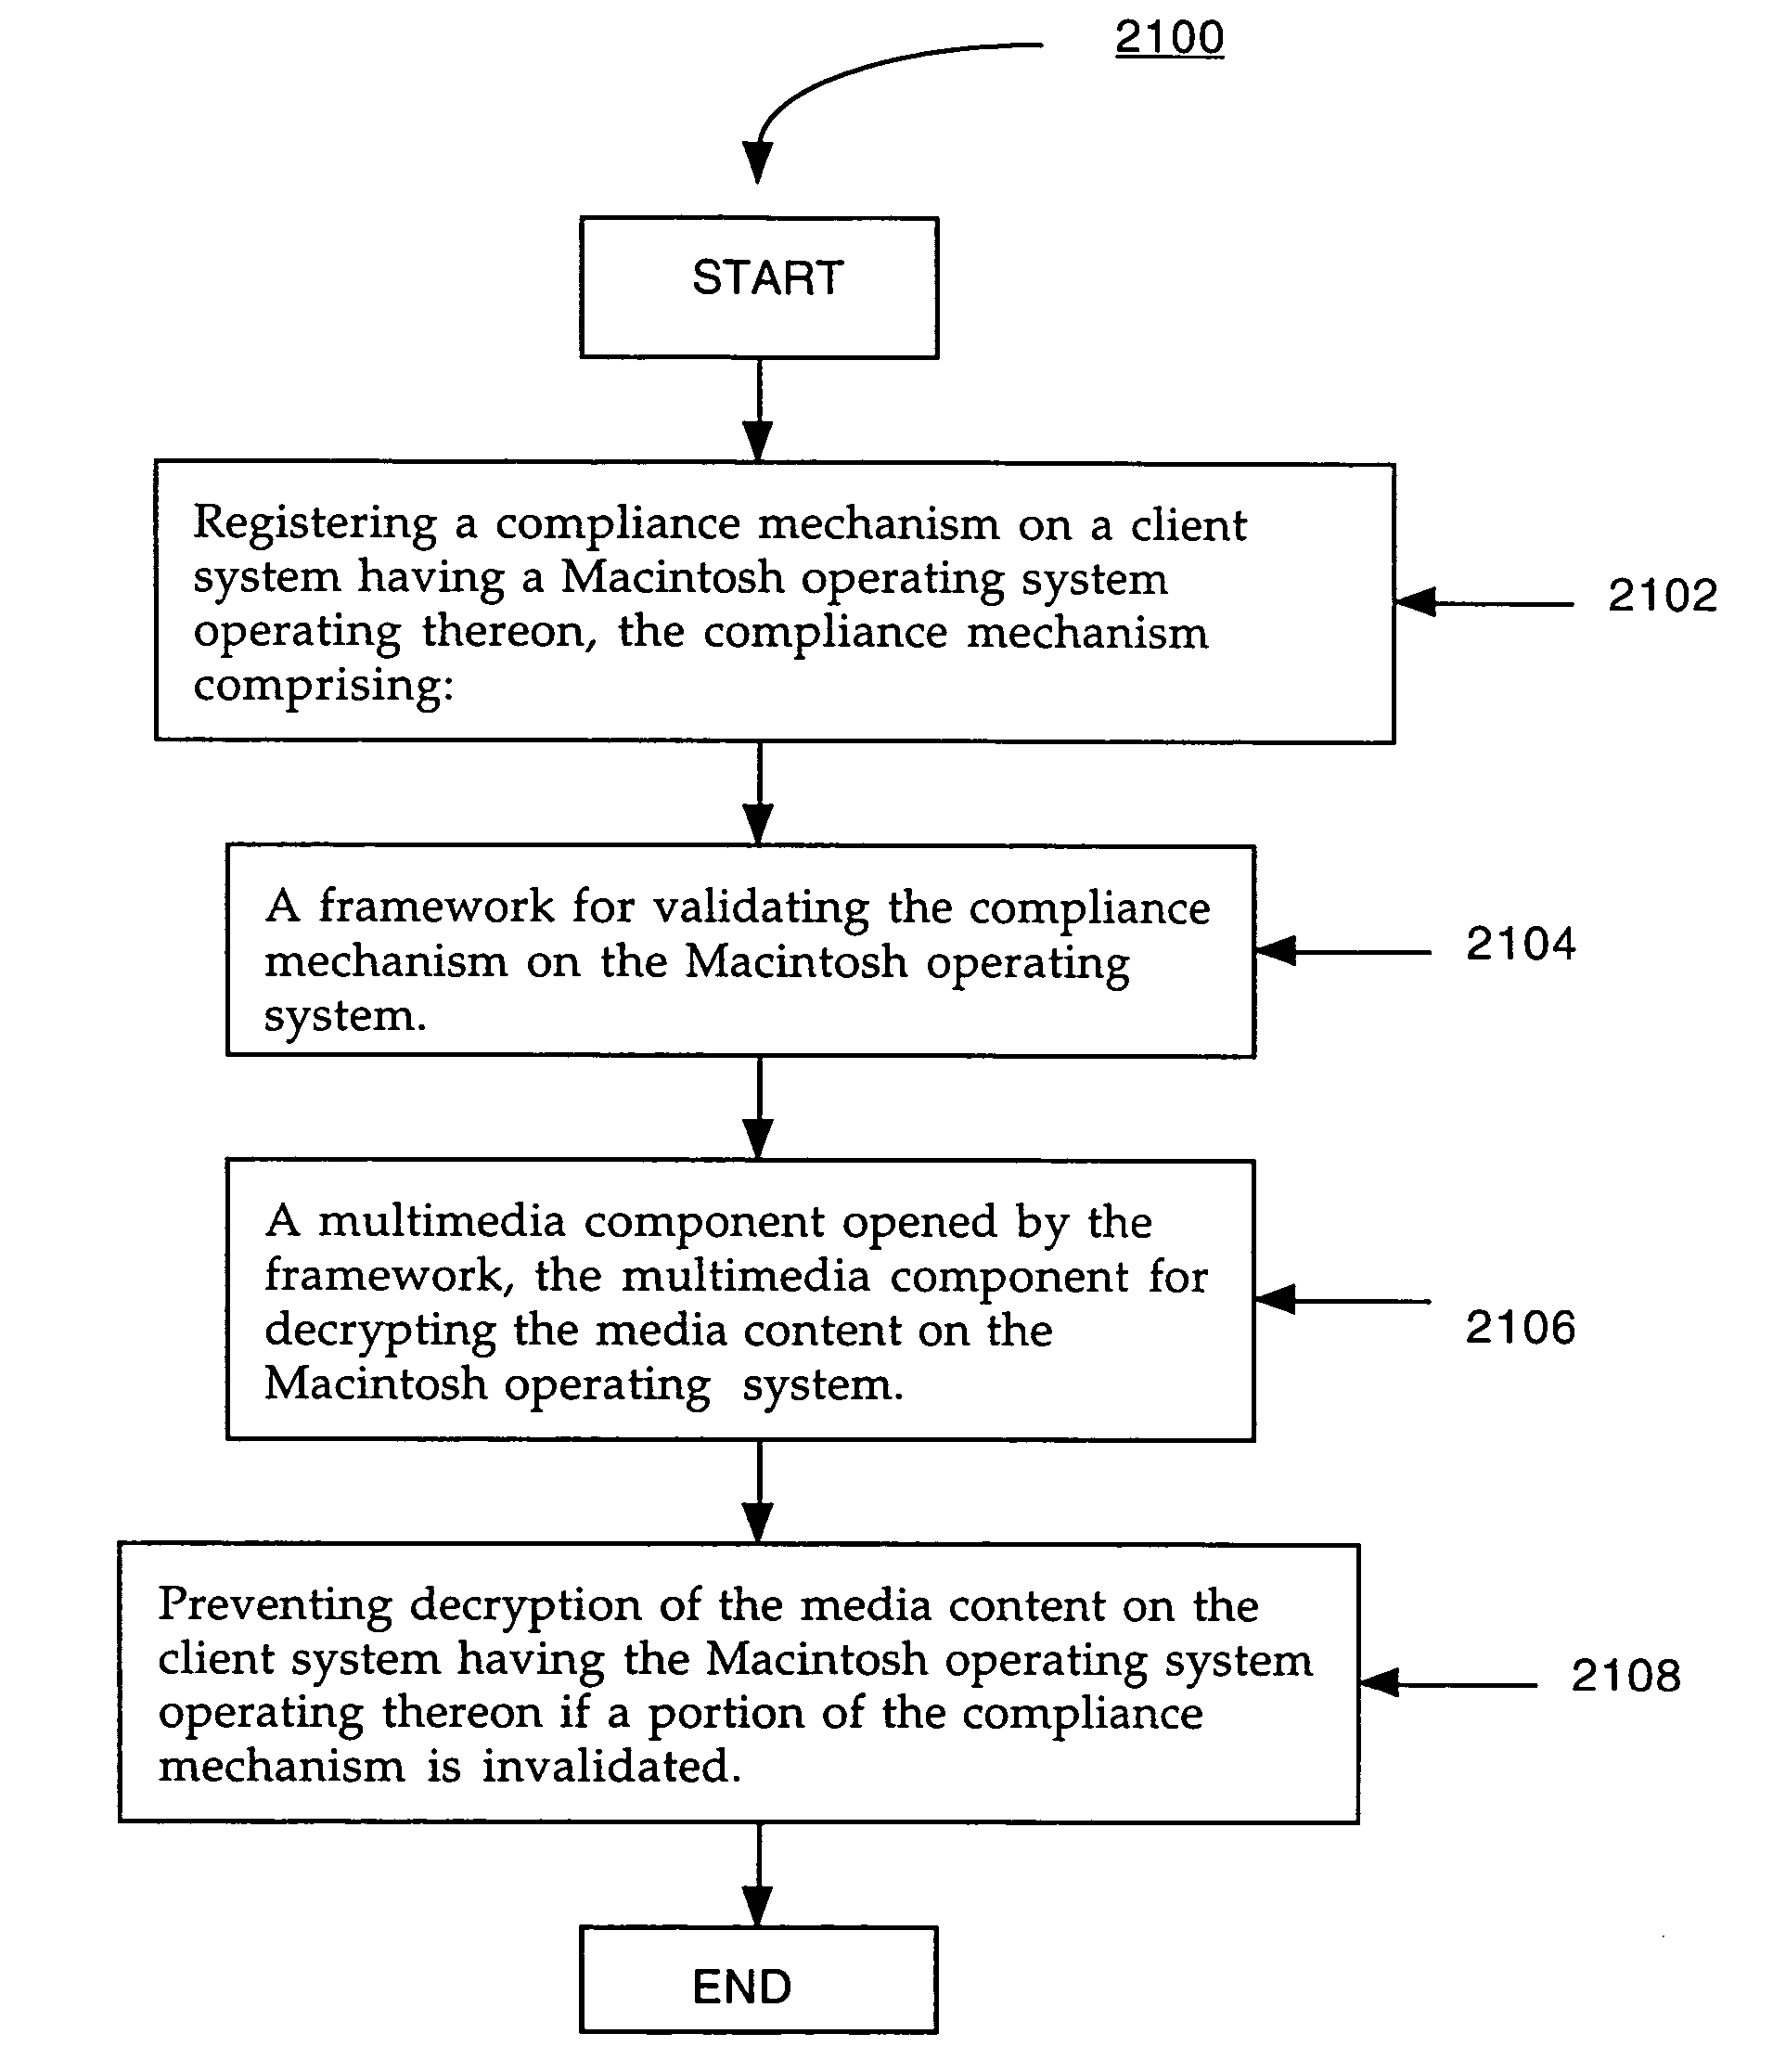 Method and system for preventing unauthorized recording of media content on a Macintosh operating system